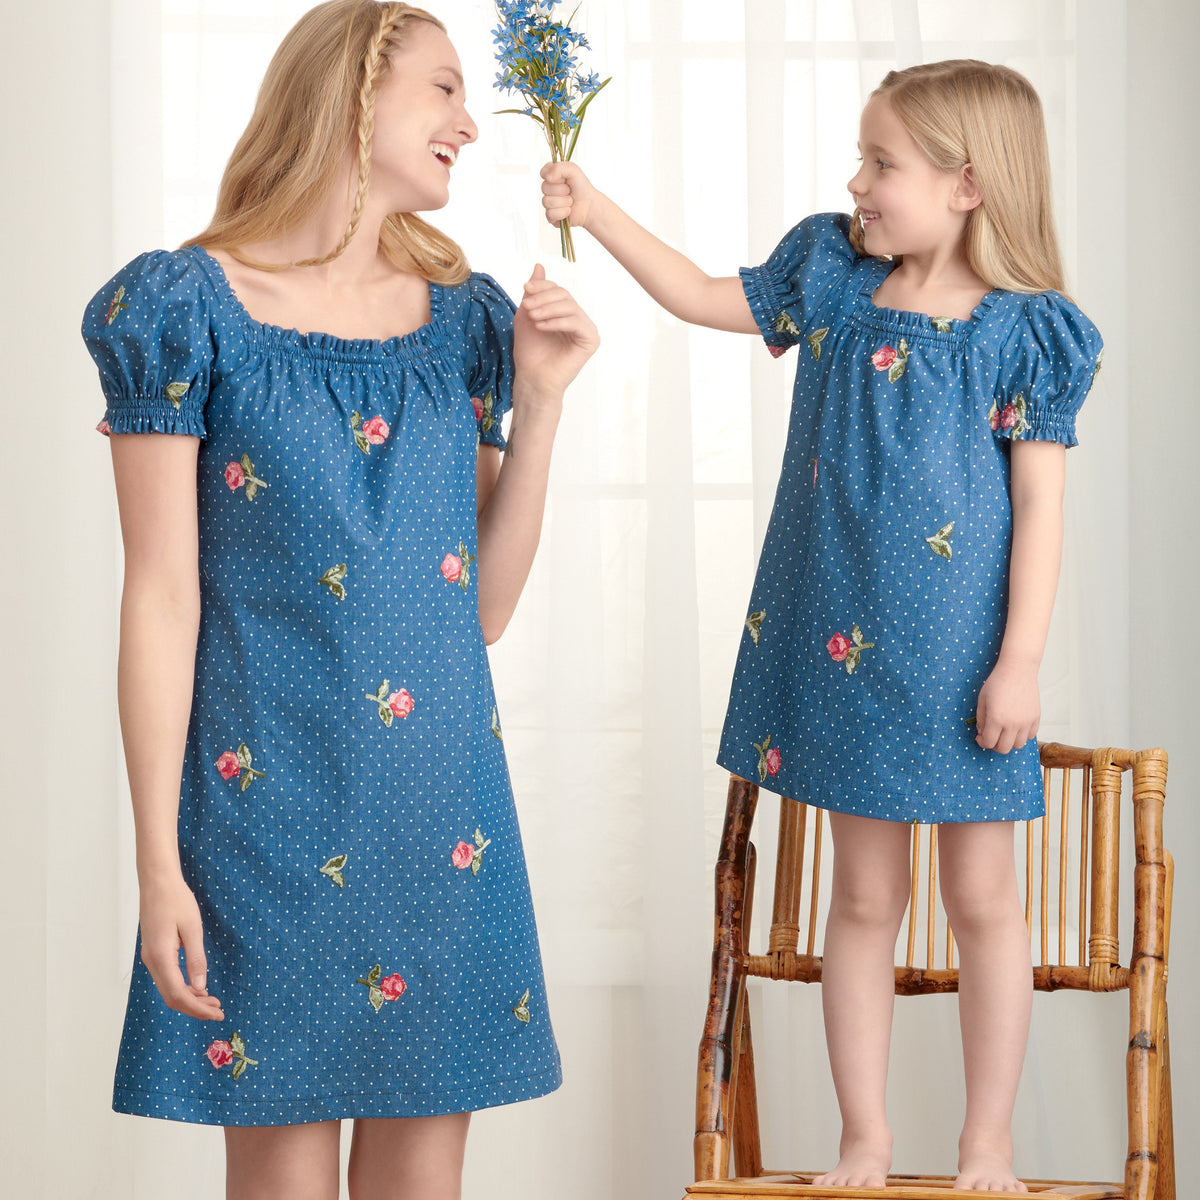 S8856, Simplicity Sewing Pattern Children's & Misses' Dress and Tunic